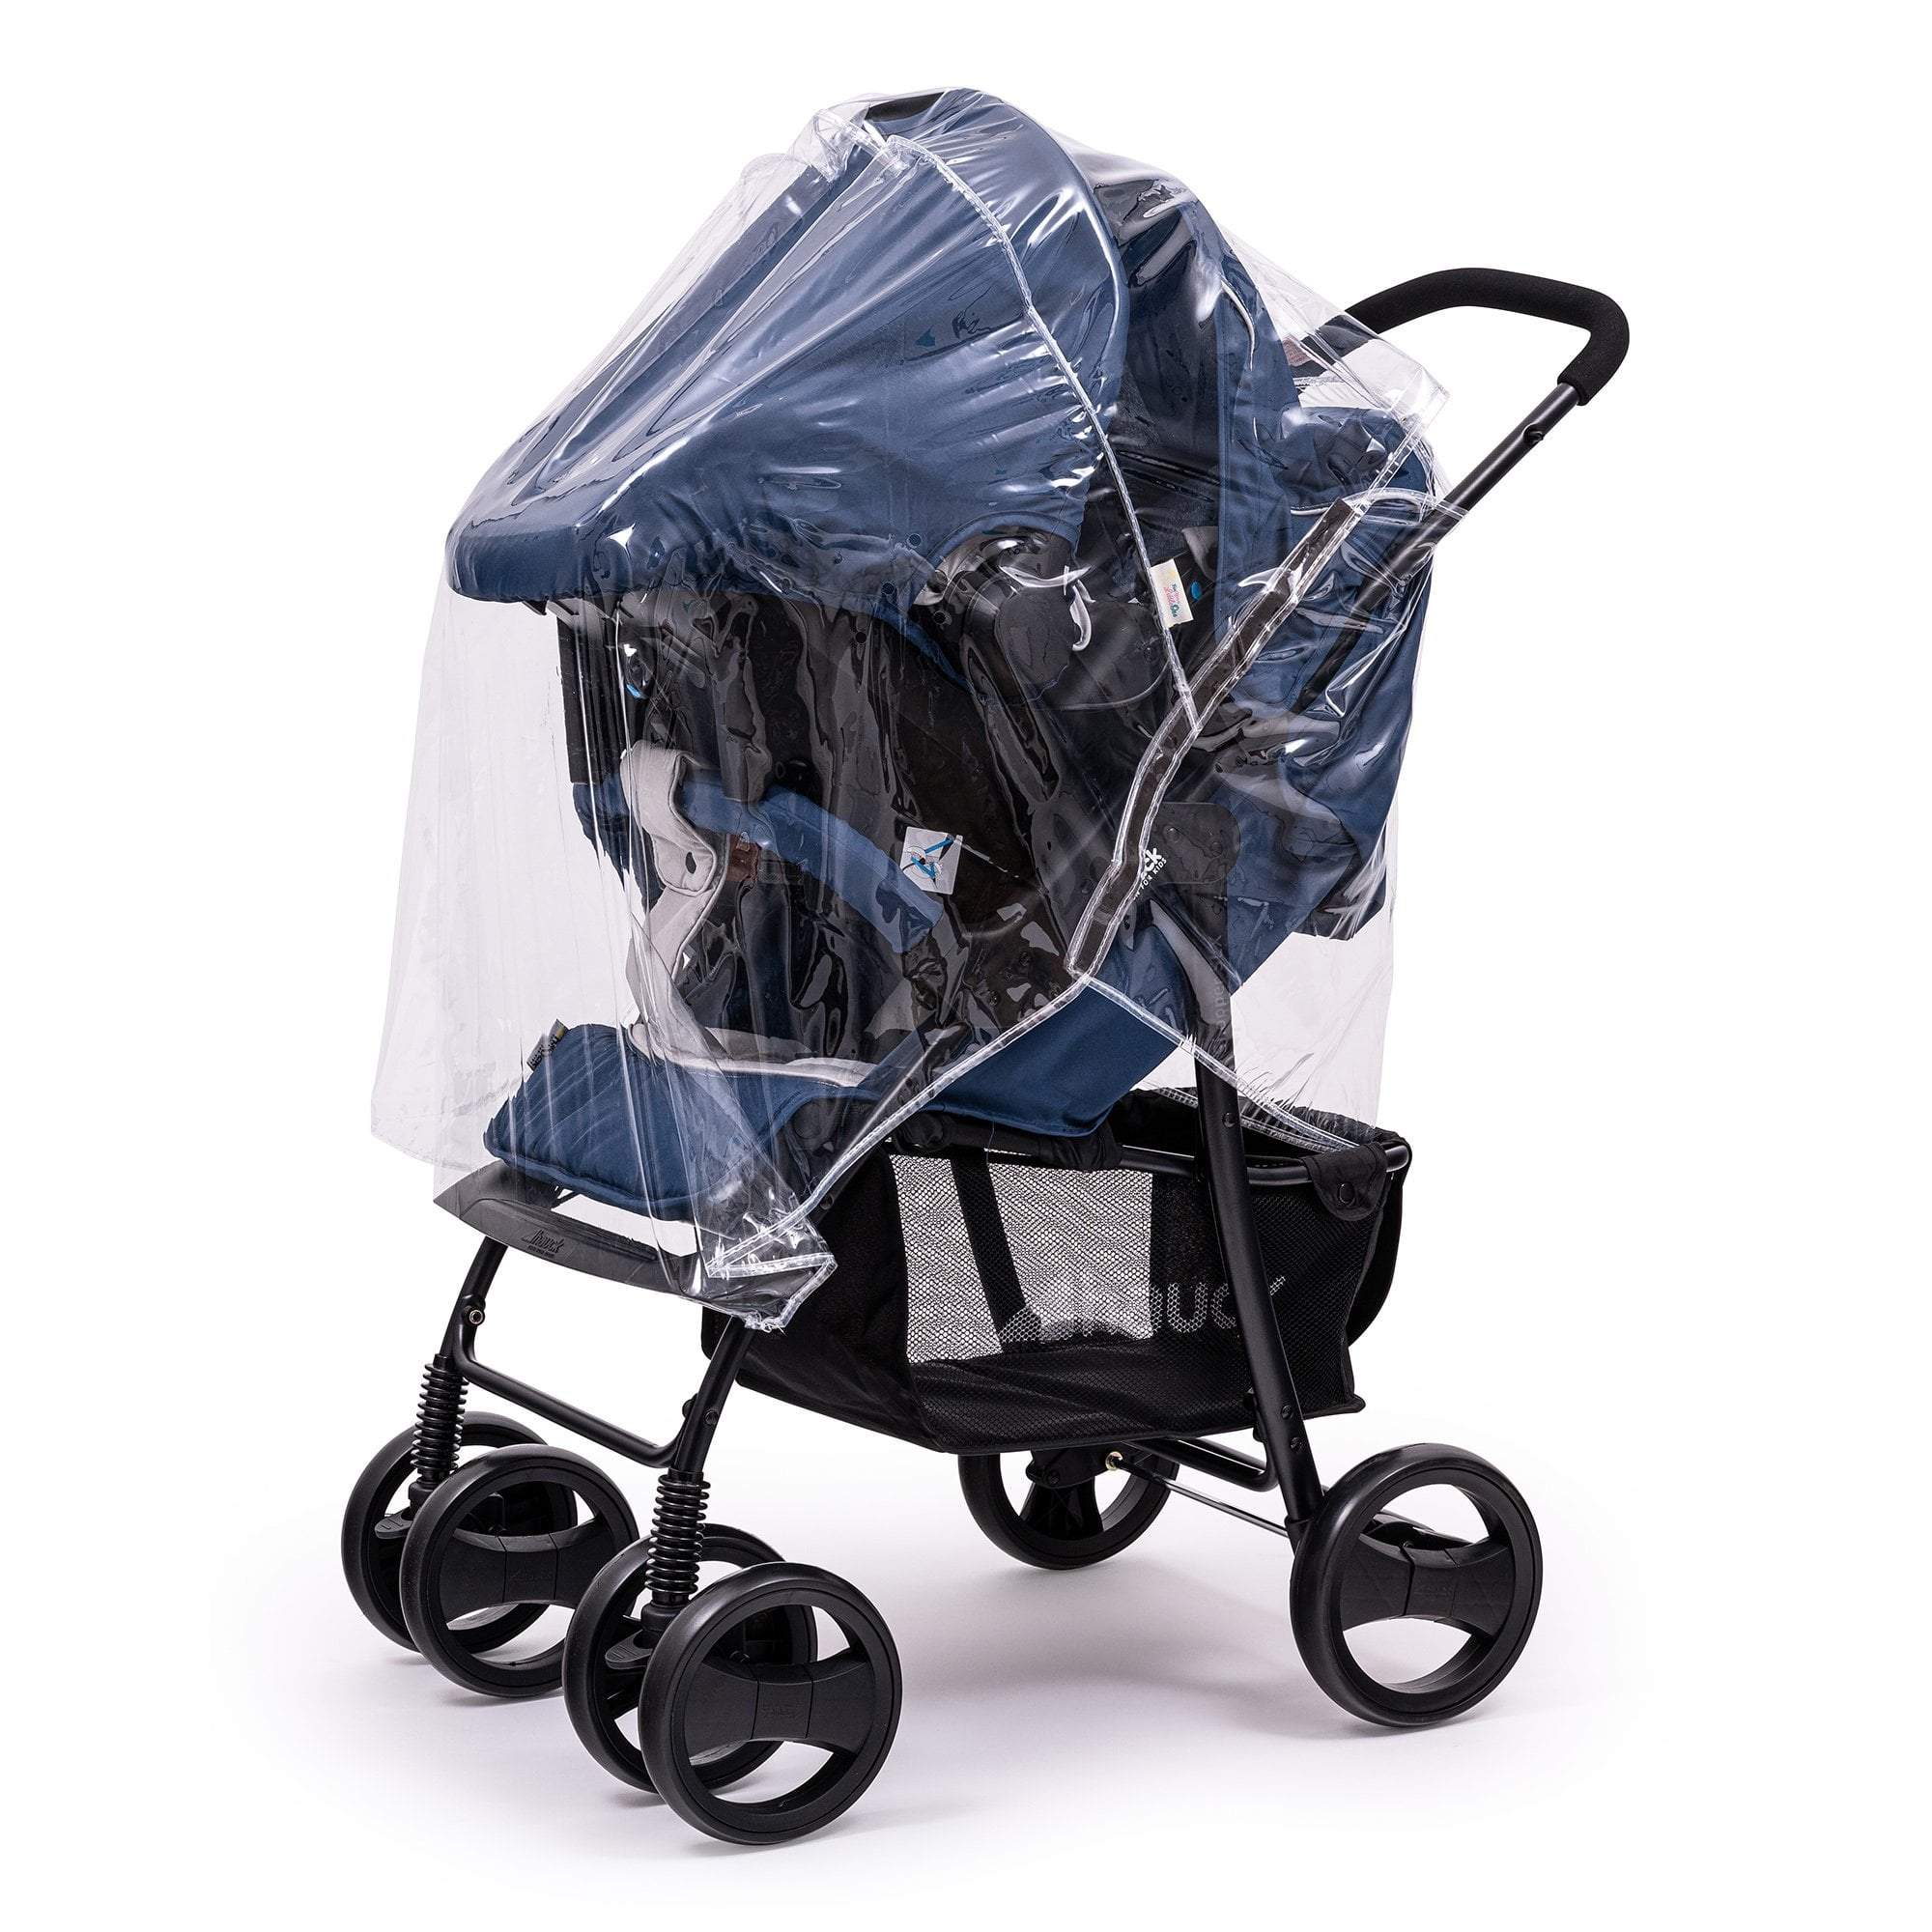 Travel System Raincover Compatible with iCandy - Fits All Models - For Your Little One